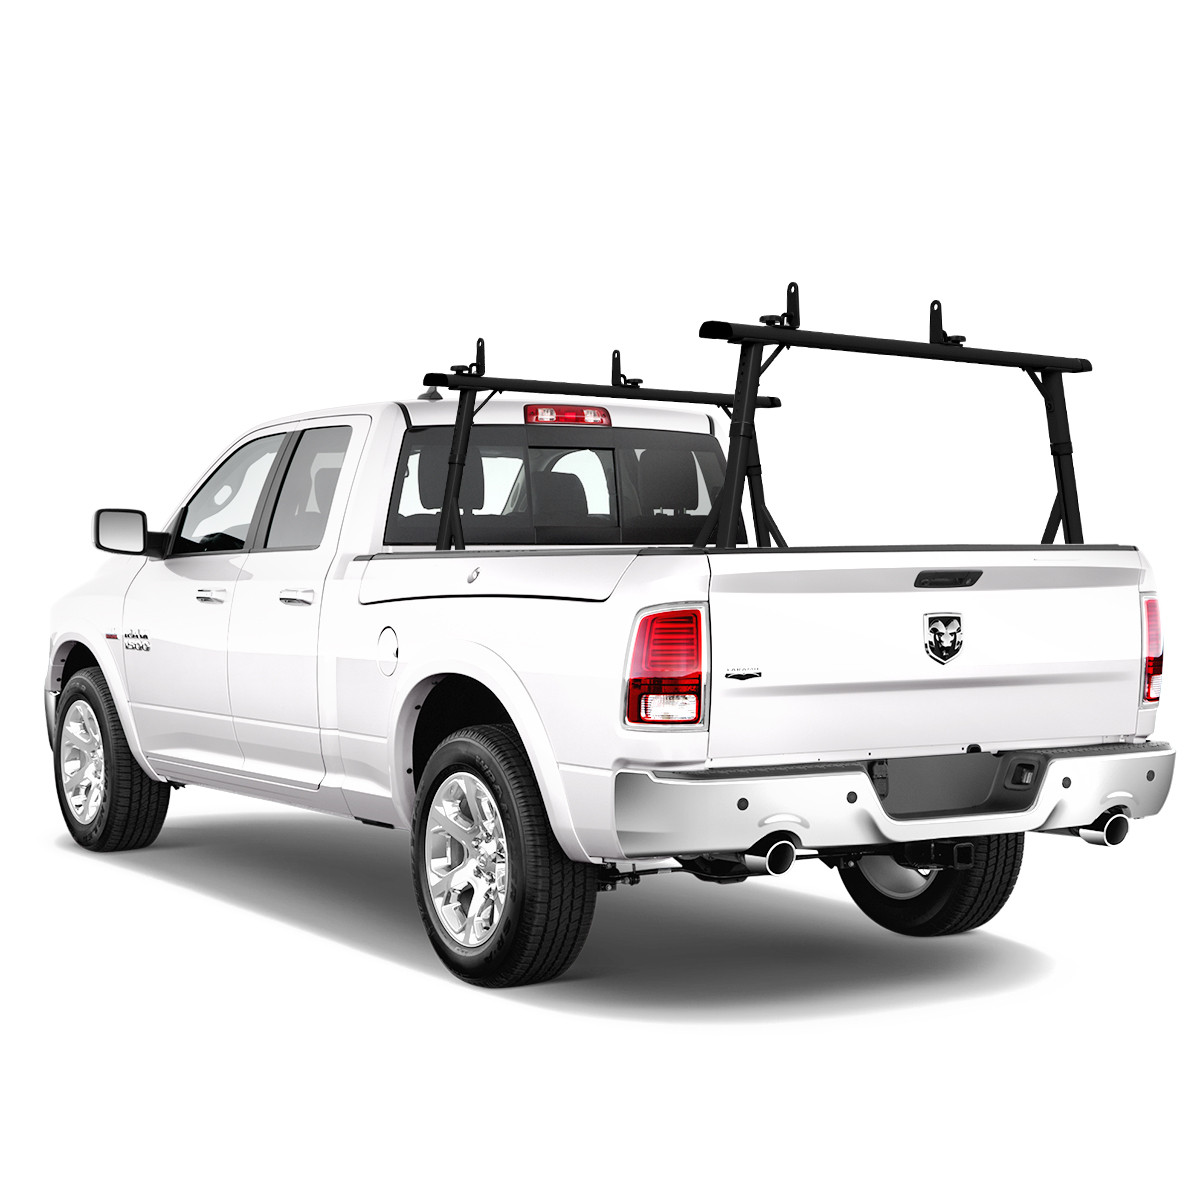 P3000 Ladder Rack For Dodge Ram with RamBox Pickup Truck